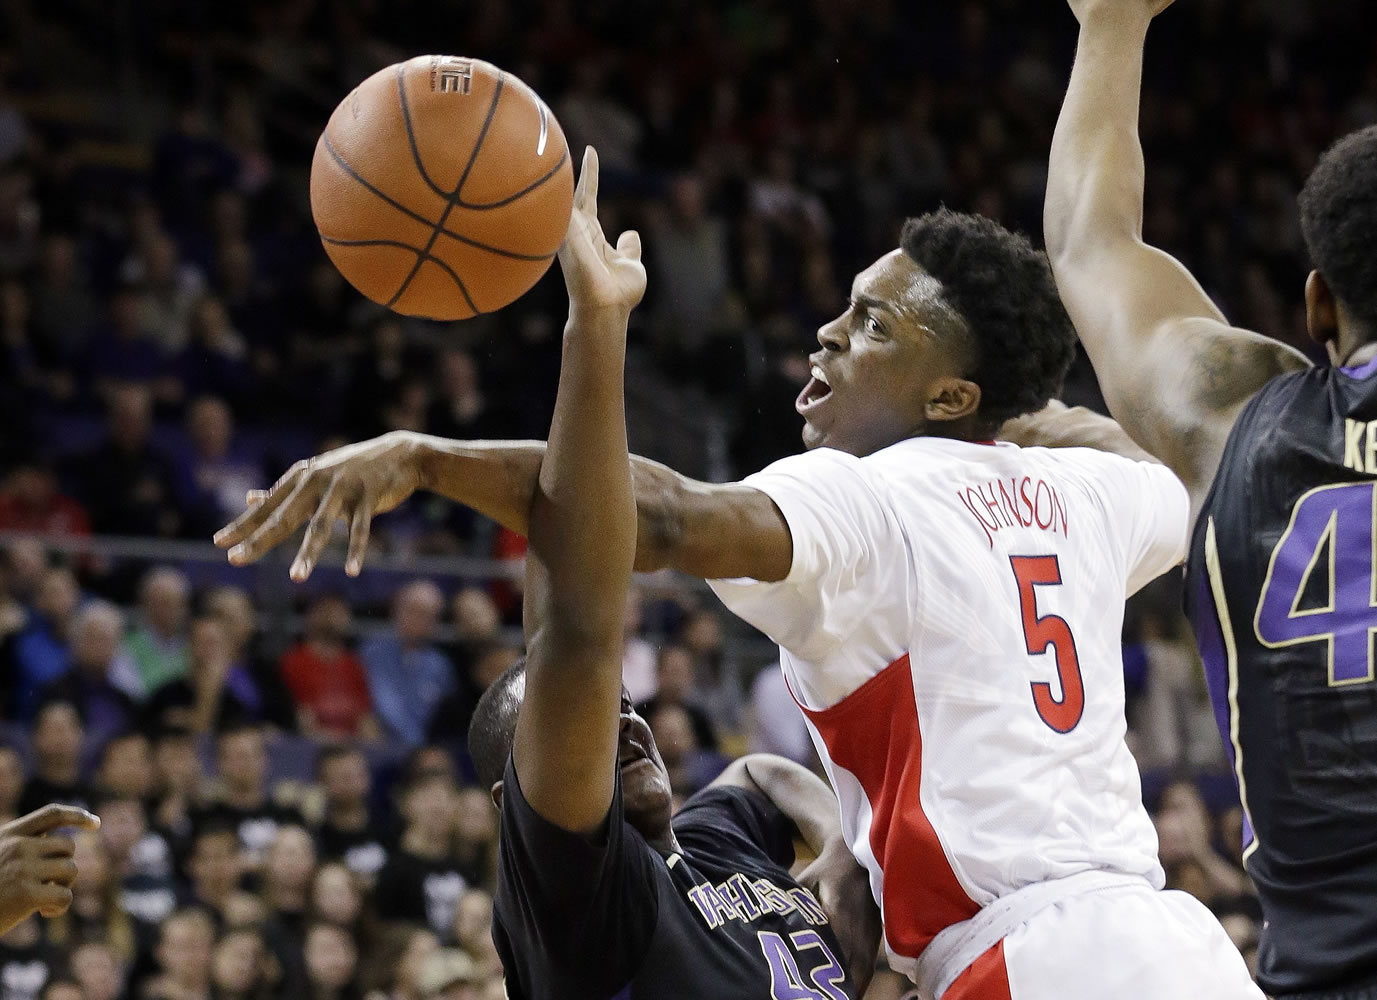 Arizona's Stanley Johnson (5) tries to knock the ball away as Washington's Donaven Dorsey drives during the first half Friday, Feb.